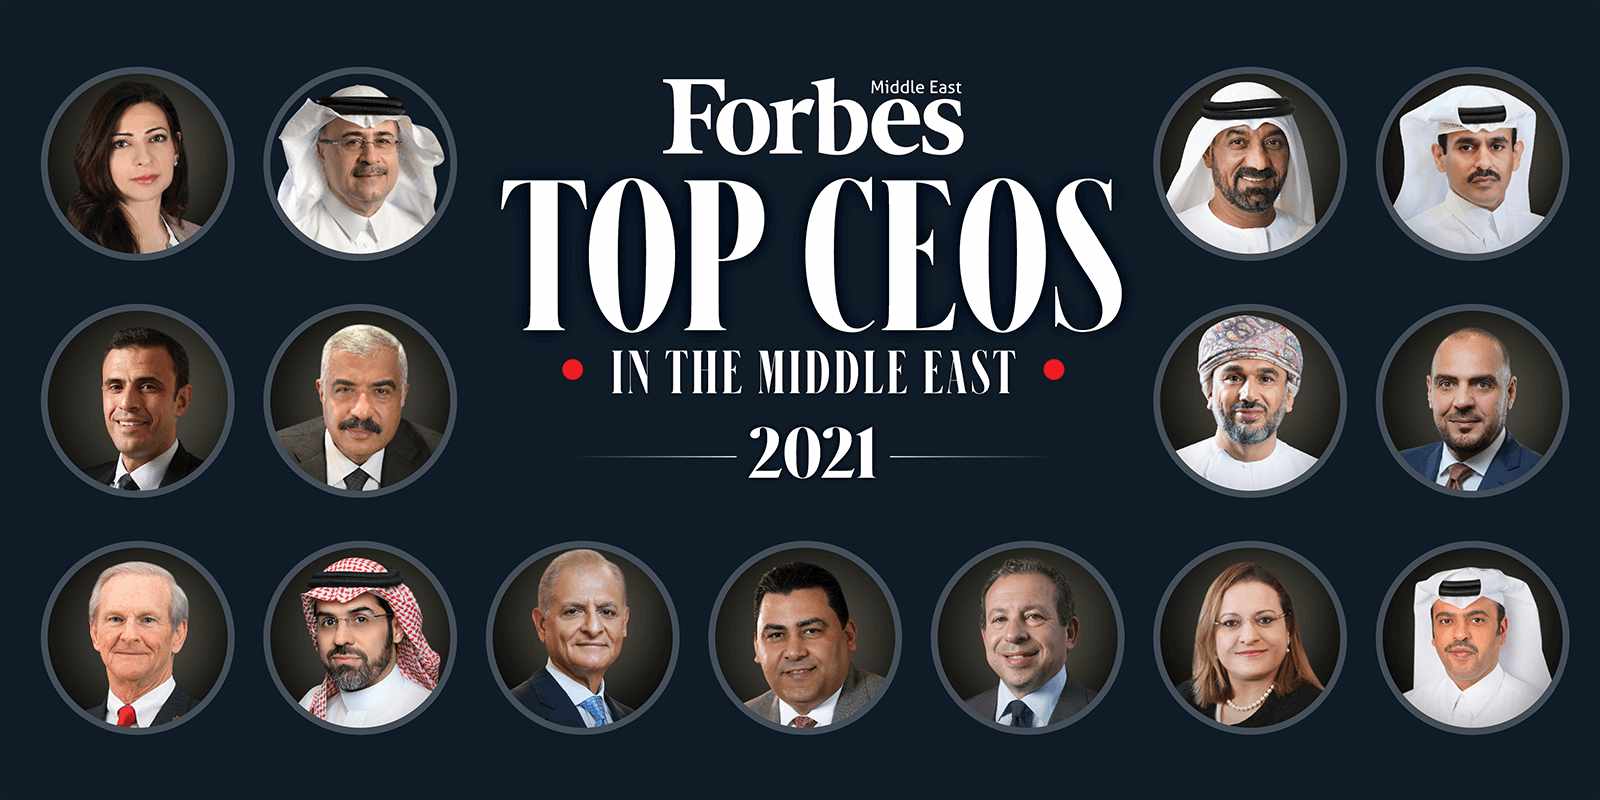 middle-east ceos forbes lists